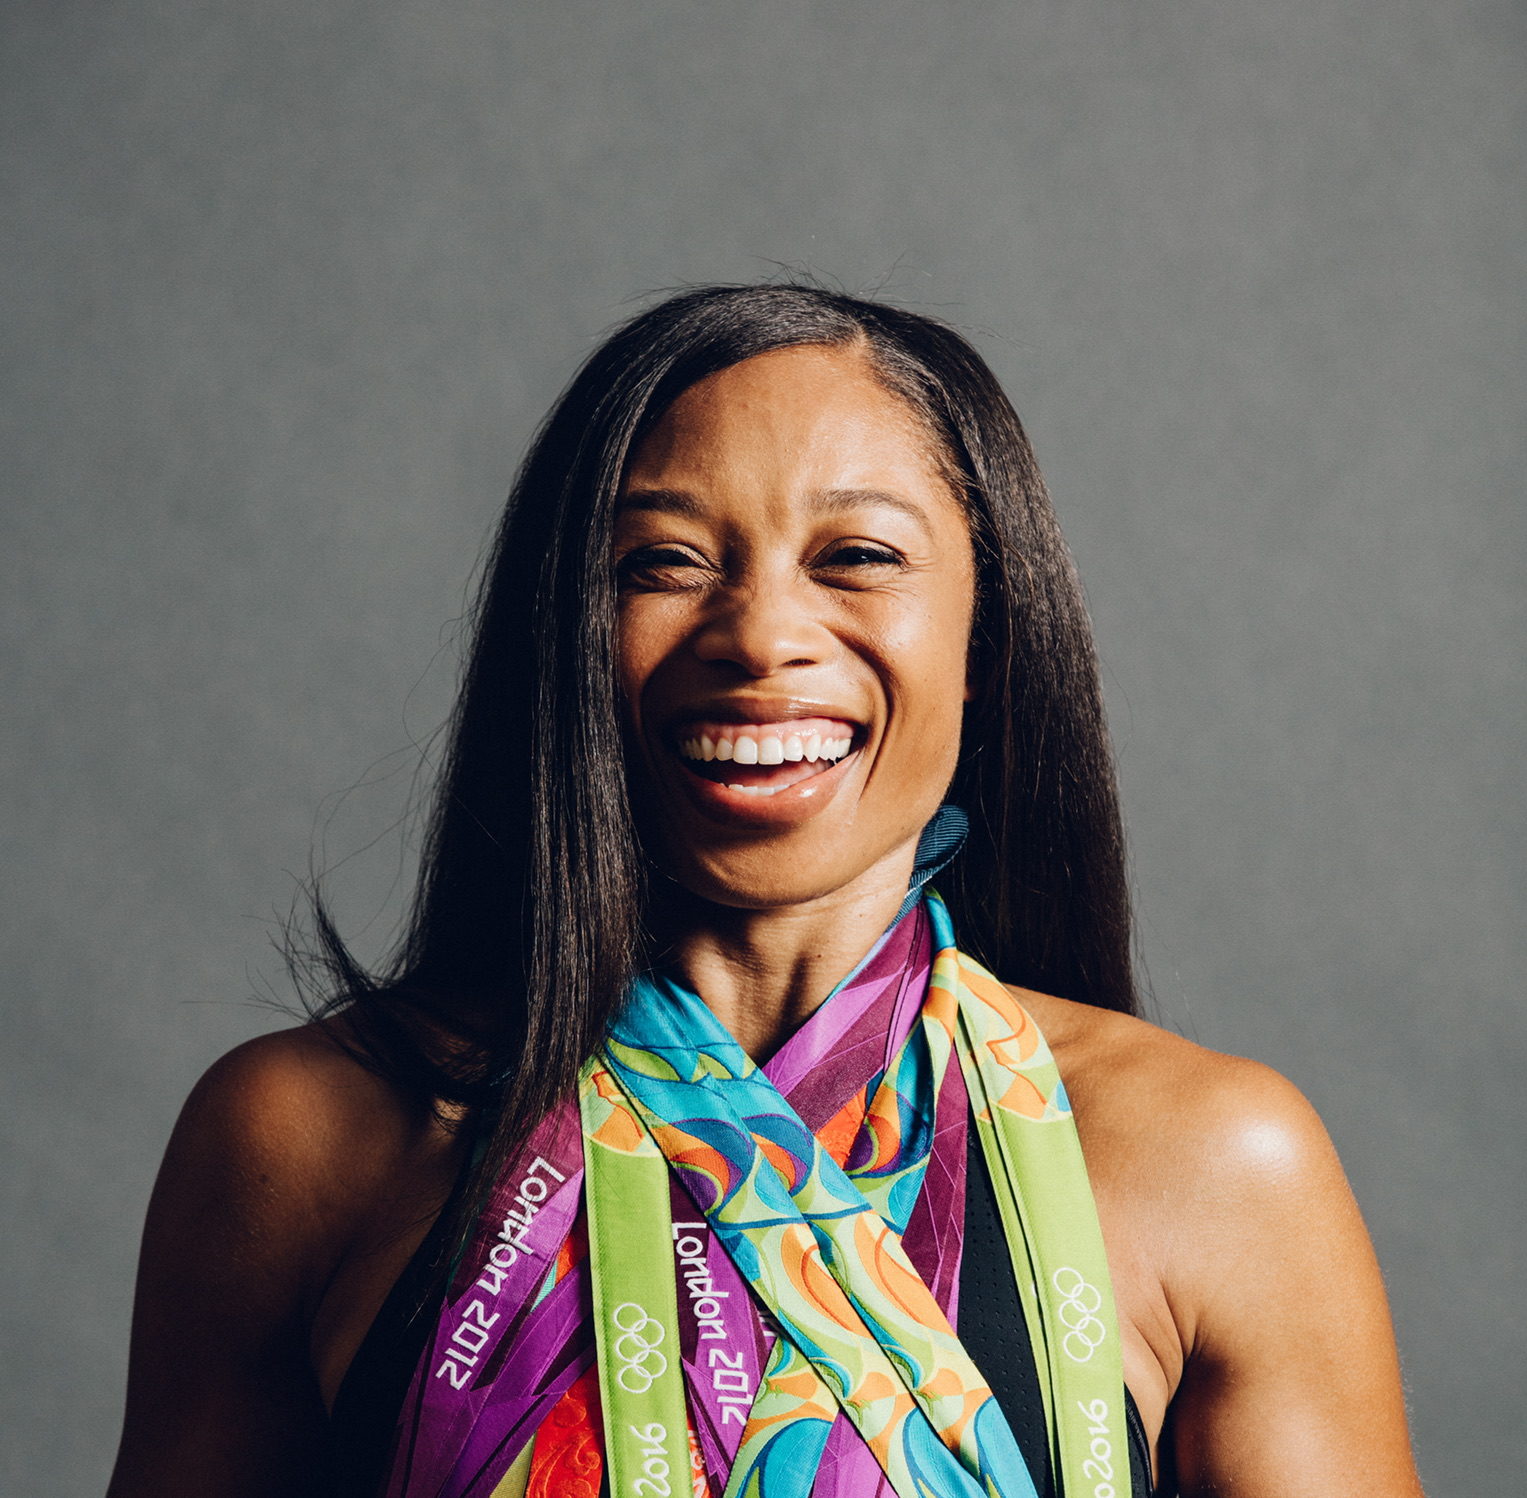 Knowing Your Worth – Tips from Olympian Allyson Felix - Texas Conference  for Women